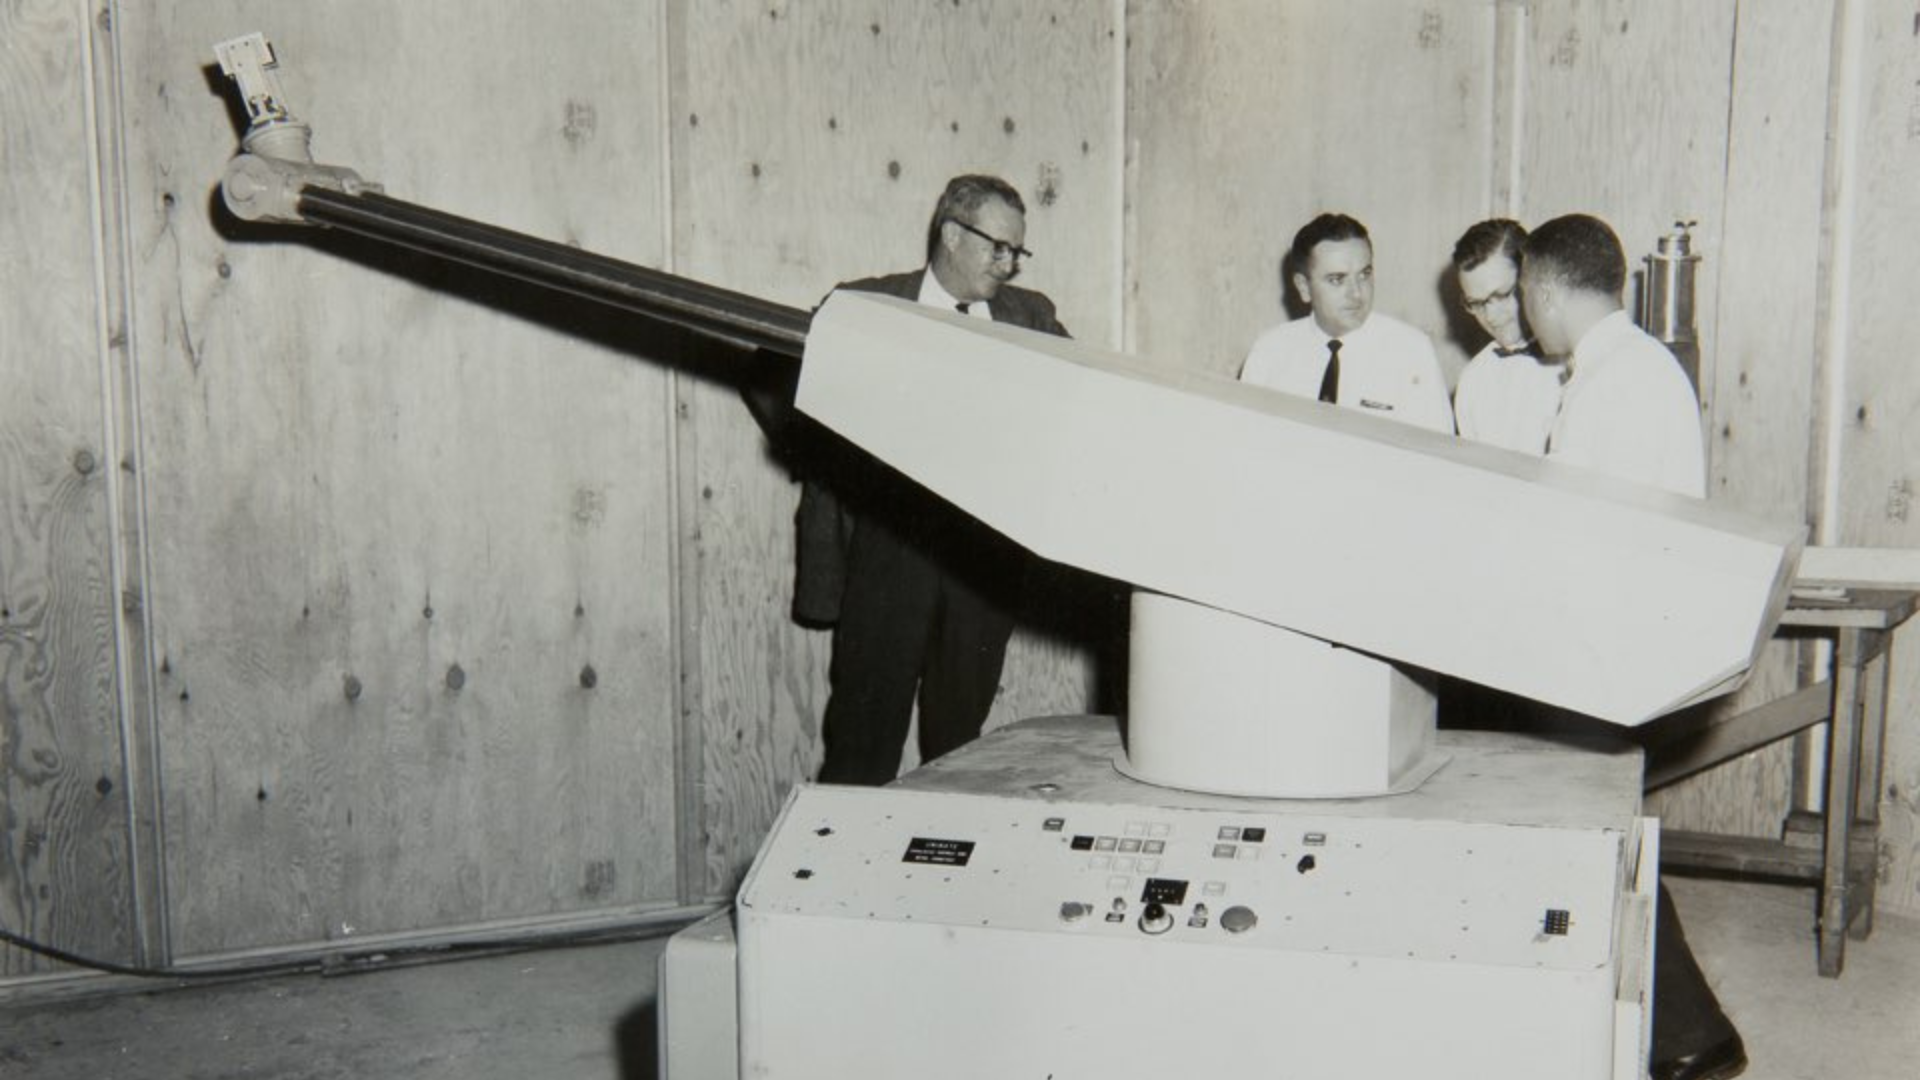 George Devol and his team with the first programmable robotic arm, the Unimate